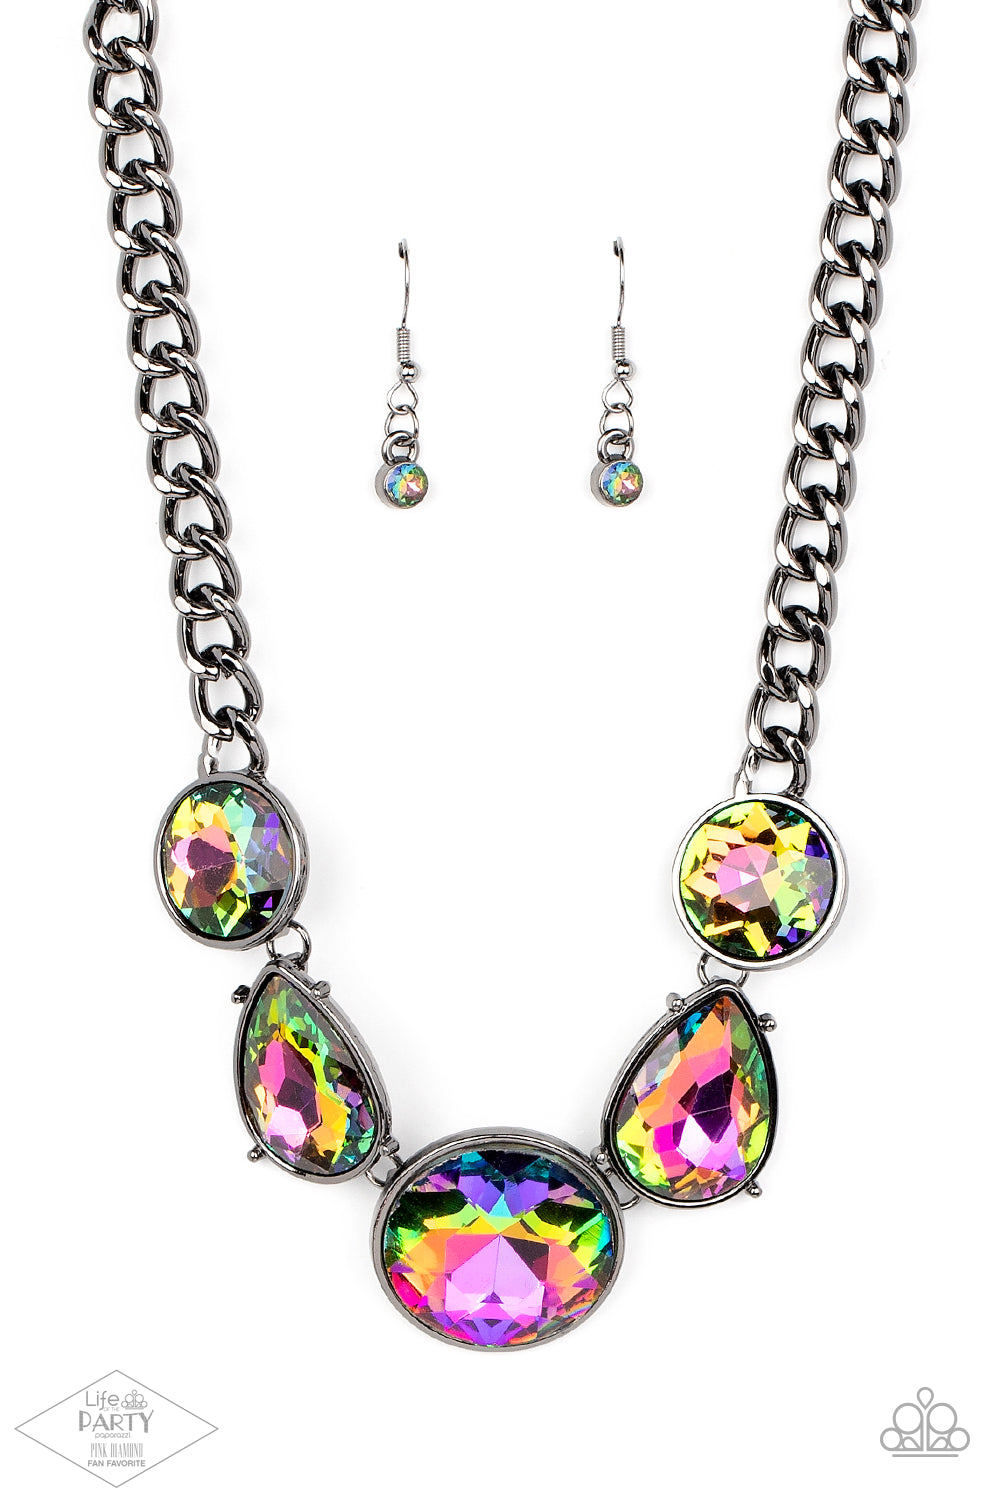 All The Worlds My Stage Multi Necklace - Paparazzi Accessories  Infused with heavy gunmetal chain, an exaggerated display of round and teardrop-shaped oil spill rhinestones connects below the collar for a blinding look. Features an adjustable clasp closure.  Sold as one individual necklace. Includes one pair of matching earrings. This Fan Favorite is back in the spotlight at the request of our 2021 Life of the Party member with Pink Diamond Access, Kathy D.